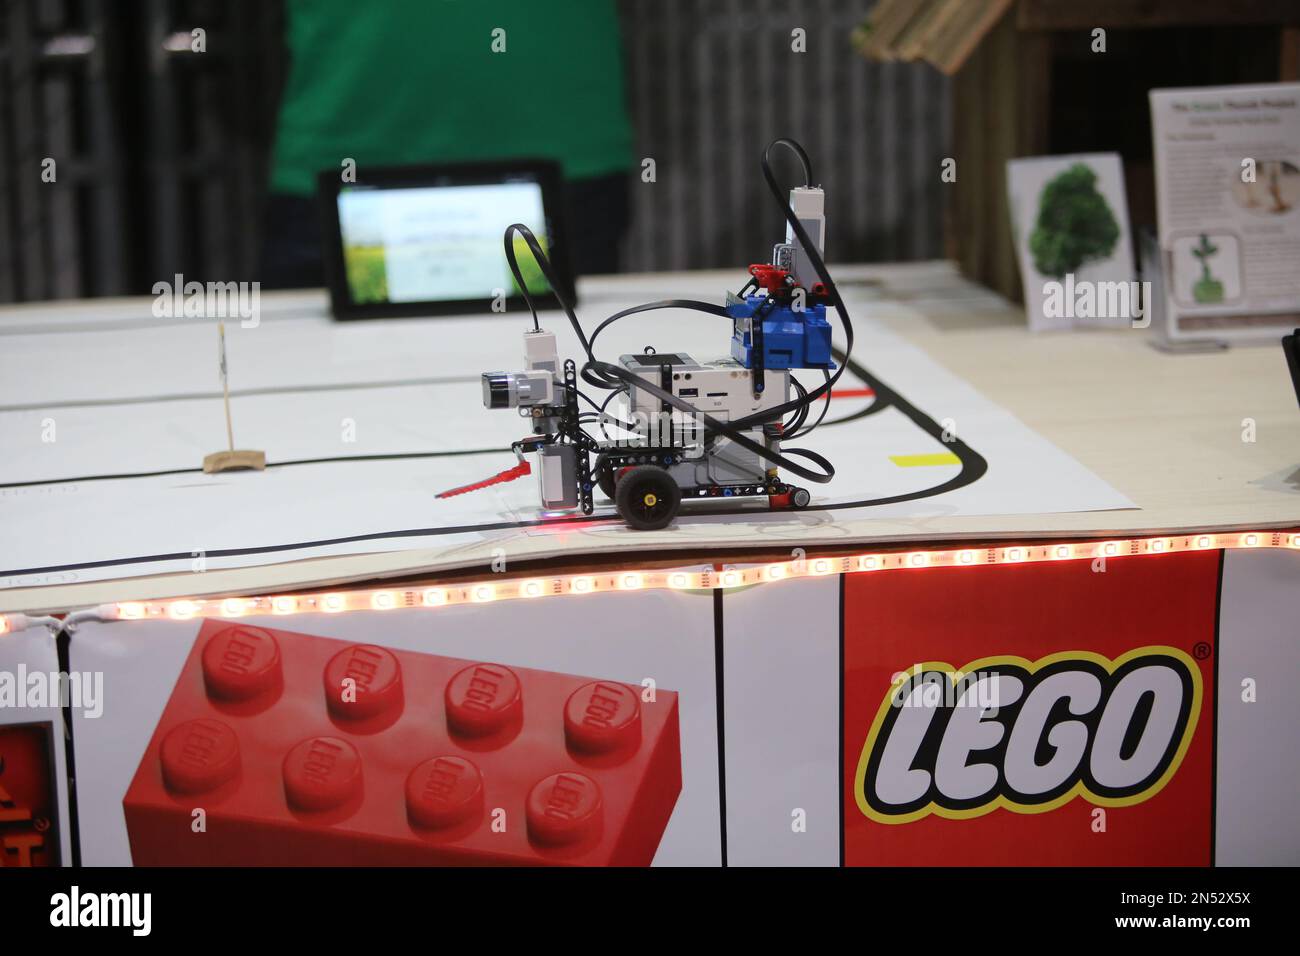 The LEGO MINDSTORMS EV3 "Build 4 Good" challenge in Seattle tasked teams  from Amazon, Egencia, Expedia, HTC, Nordstrom, Xbox and zulily to build  robots that creatively solve everyday problems. Ron Wurzer/AP Images